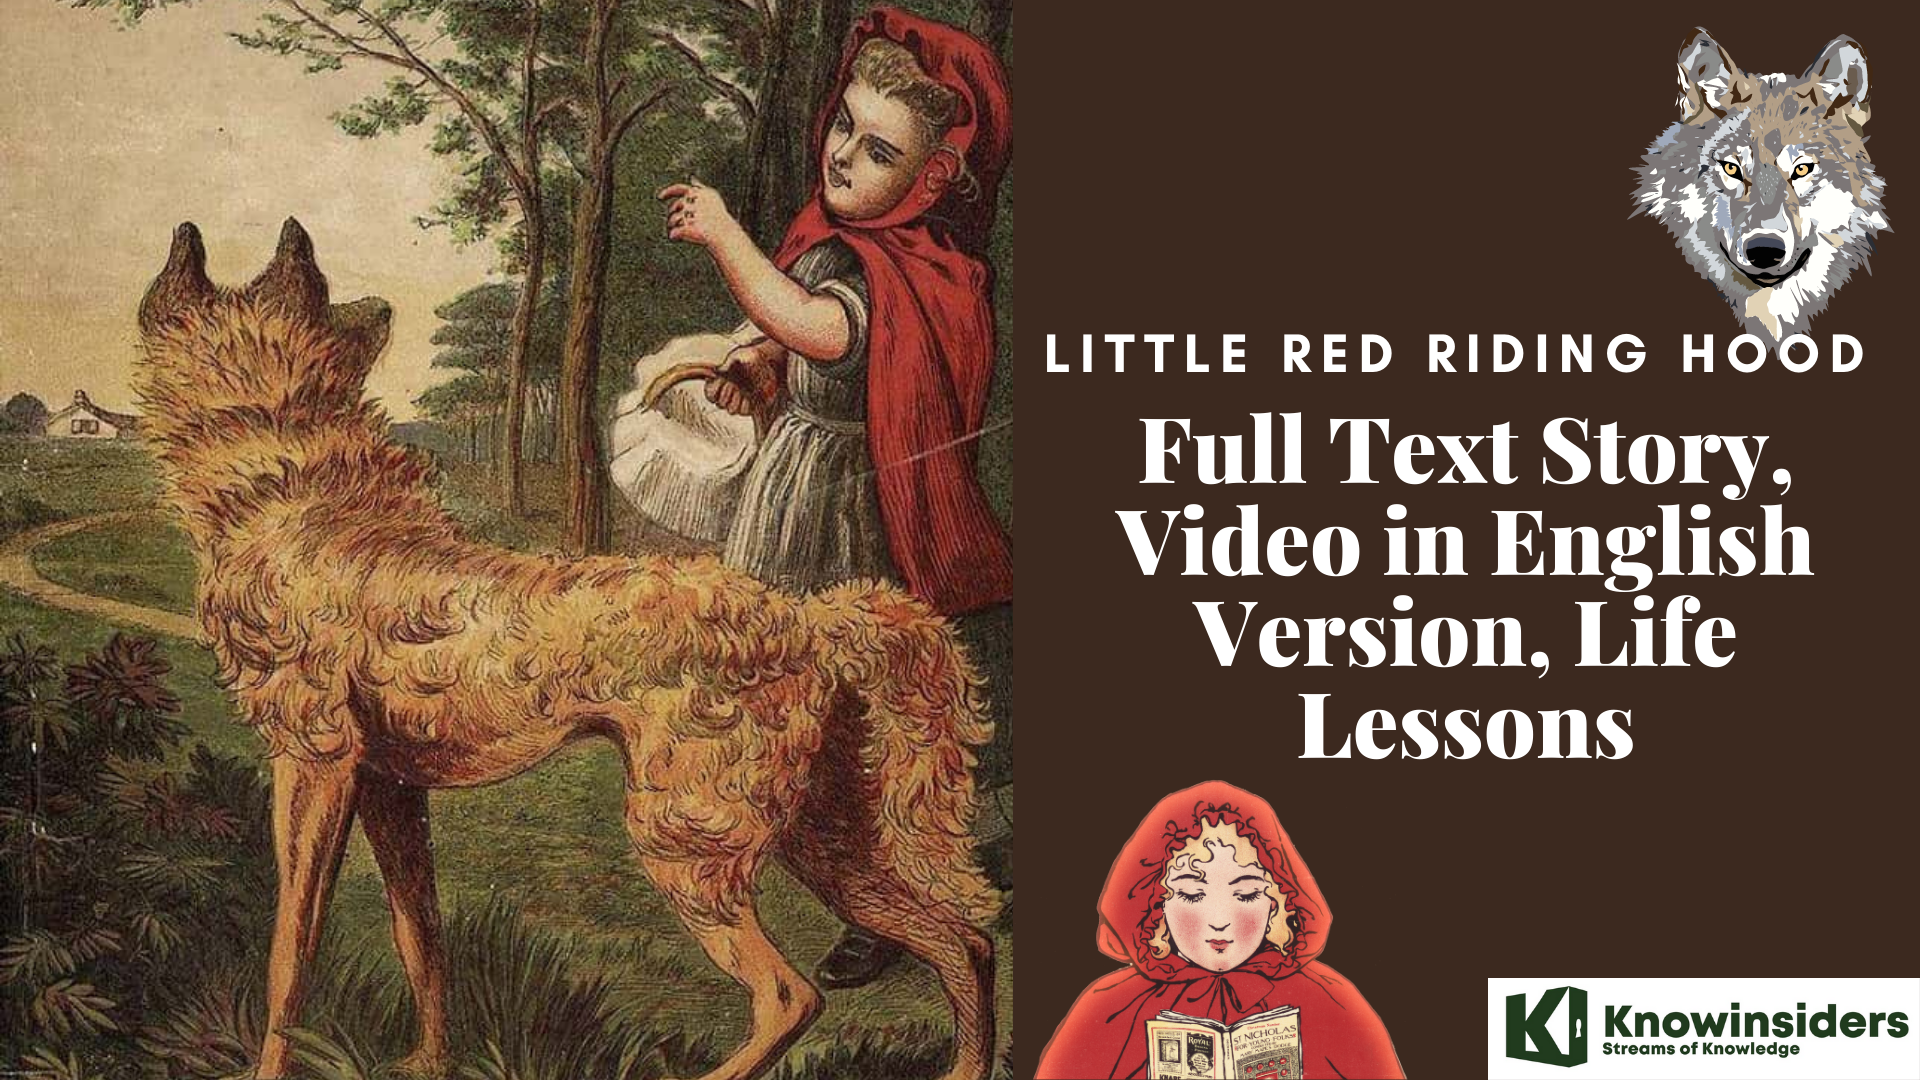 Little Red Riding Hood FairyTale: Full Text Story, Video in English Version and Life Lessons